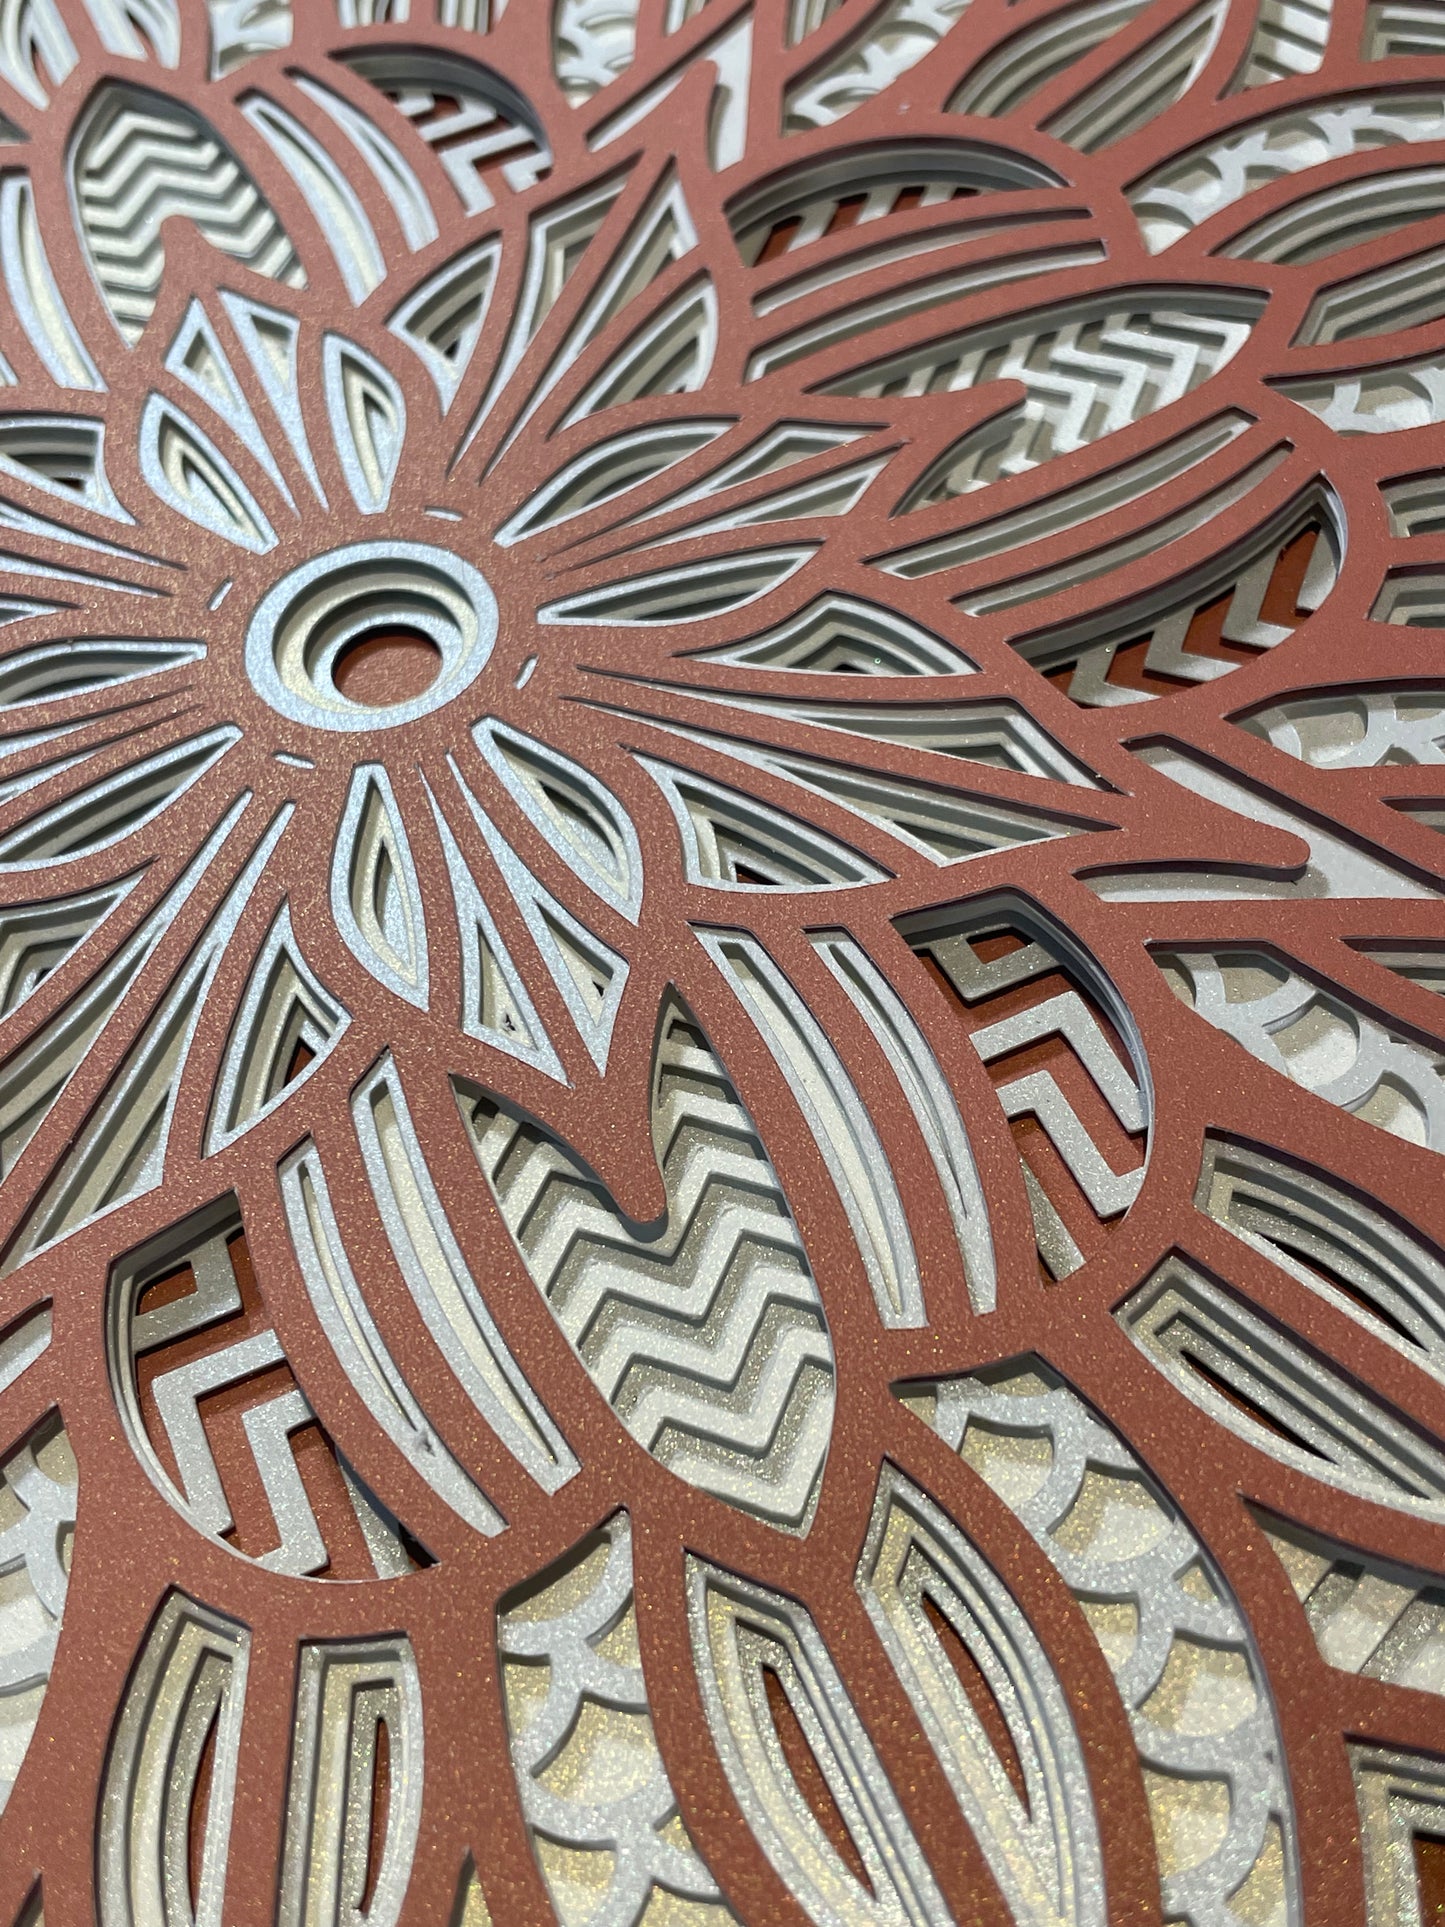 Close up view of a 3d layered Mandala SVG Design by Home Stitchery Decor. We cut this out with our Cricut Maker and you can too! Just follow along with our complete 3d Layered Mandala tutorial. Find your favorite 3d layered Mandala designs by Home Stitchery Decor